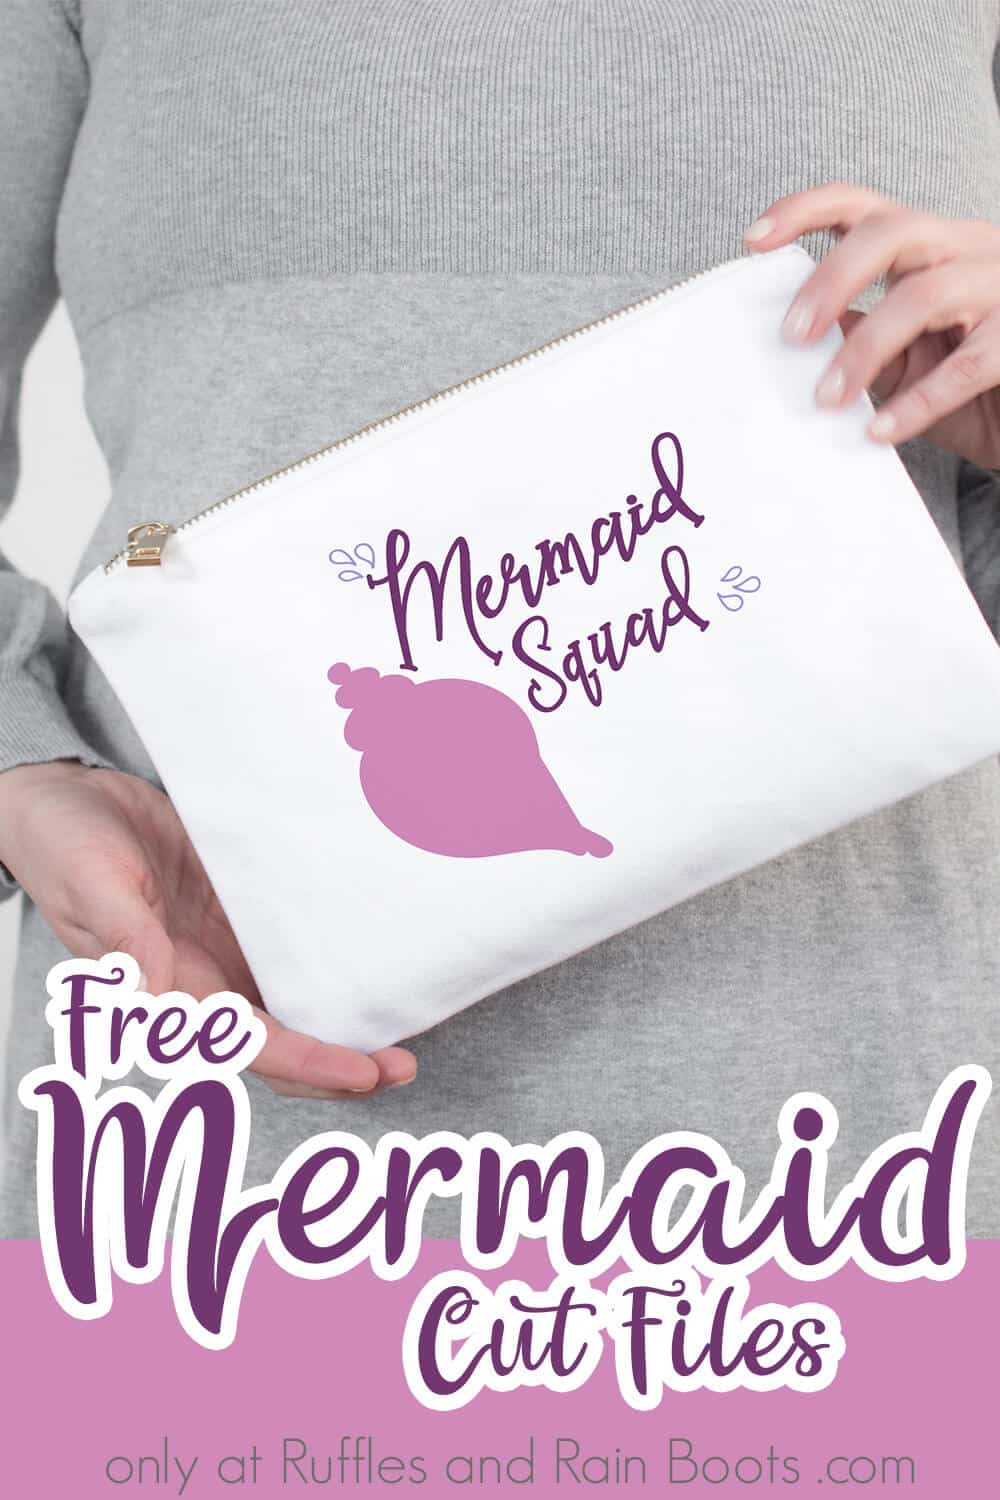 Mermaid Squad free cut file for silhouette on hand bag held by a lady with text which reads free mermaid cut files